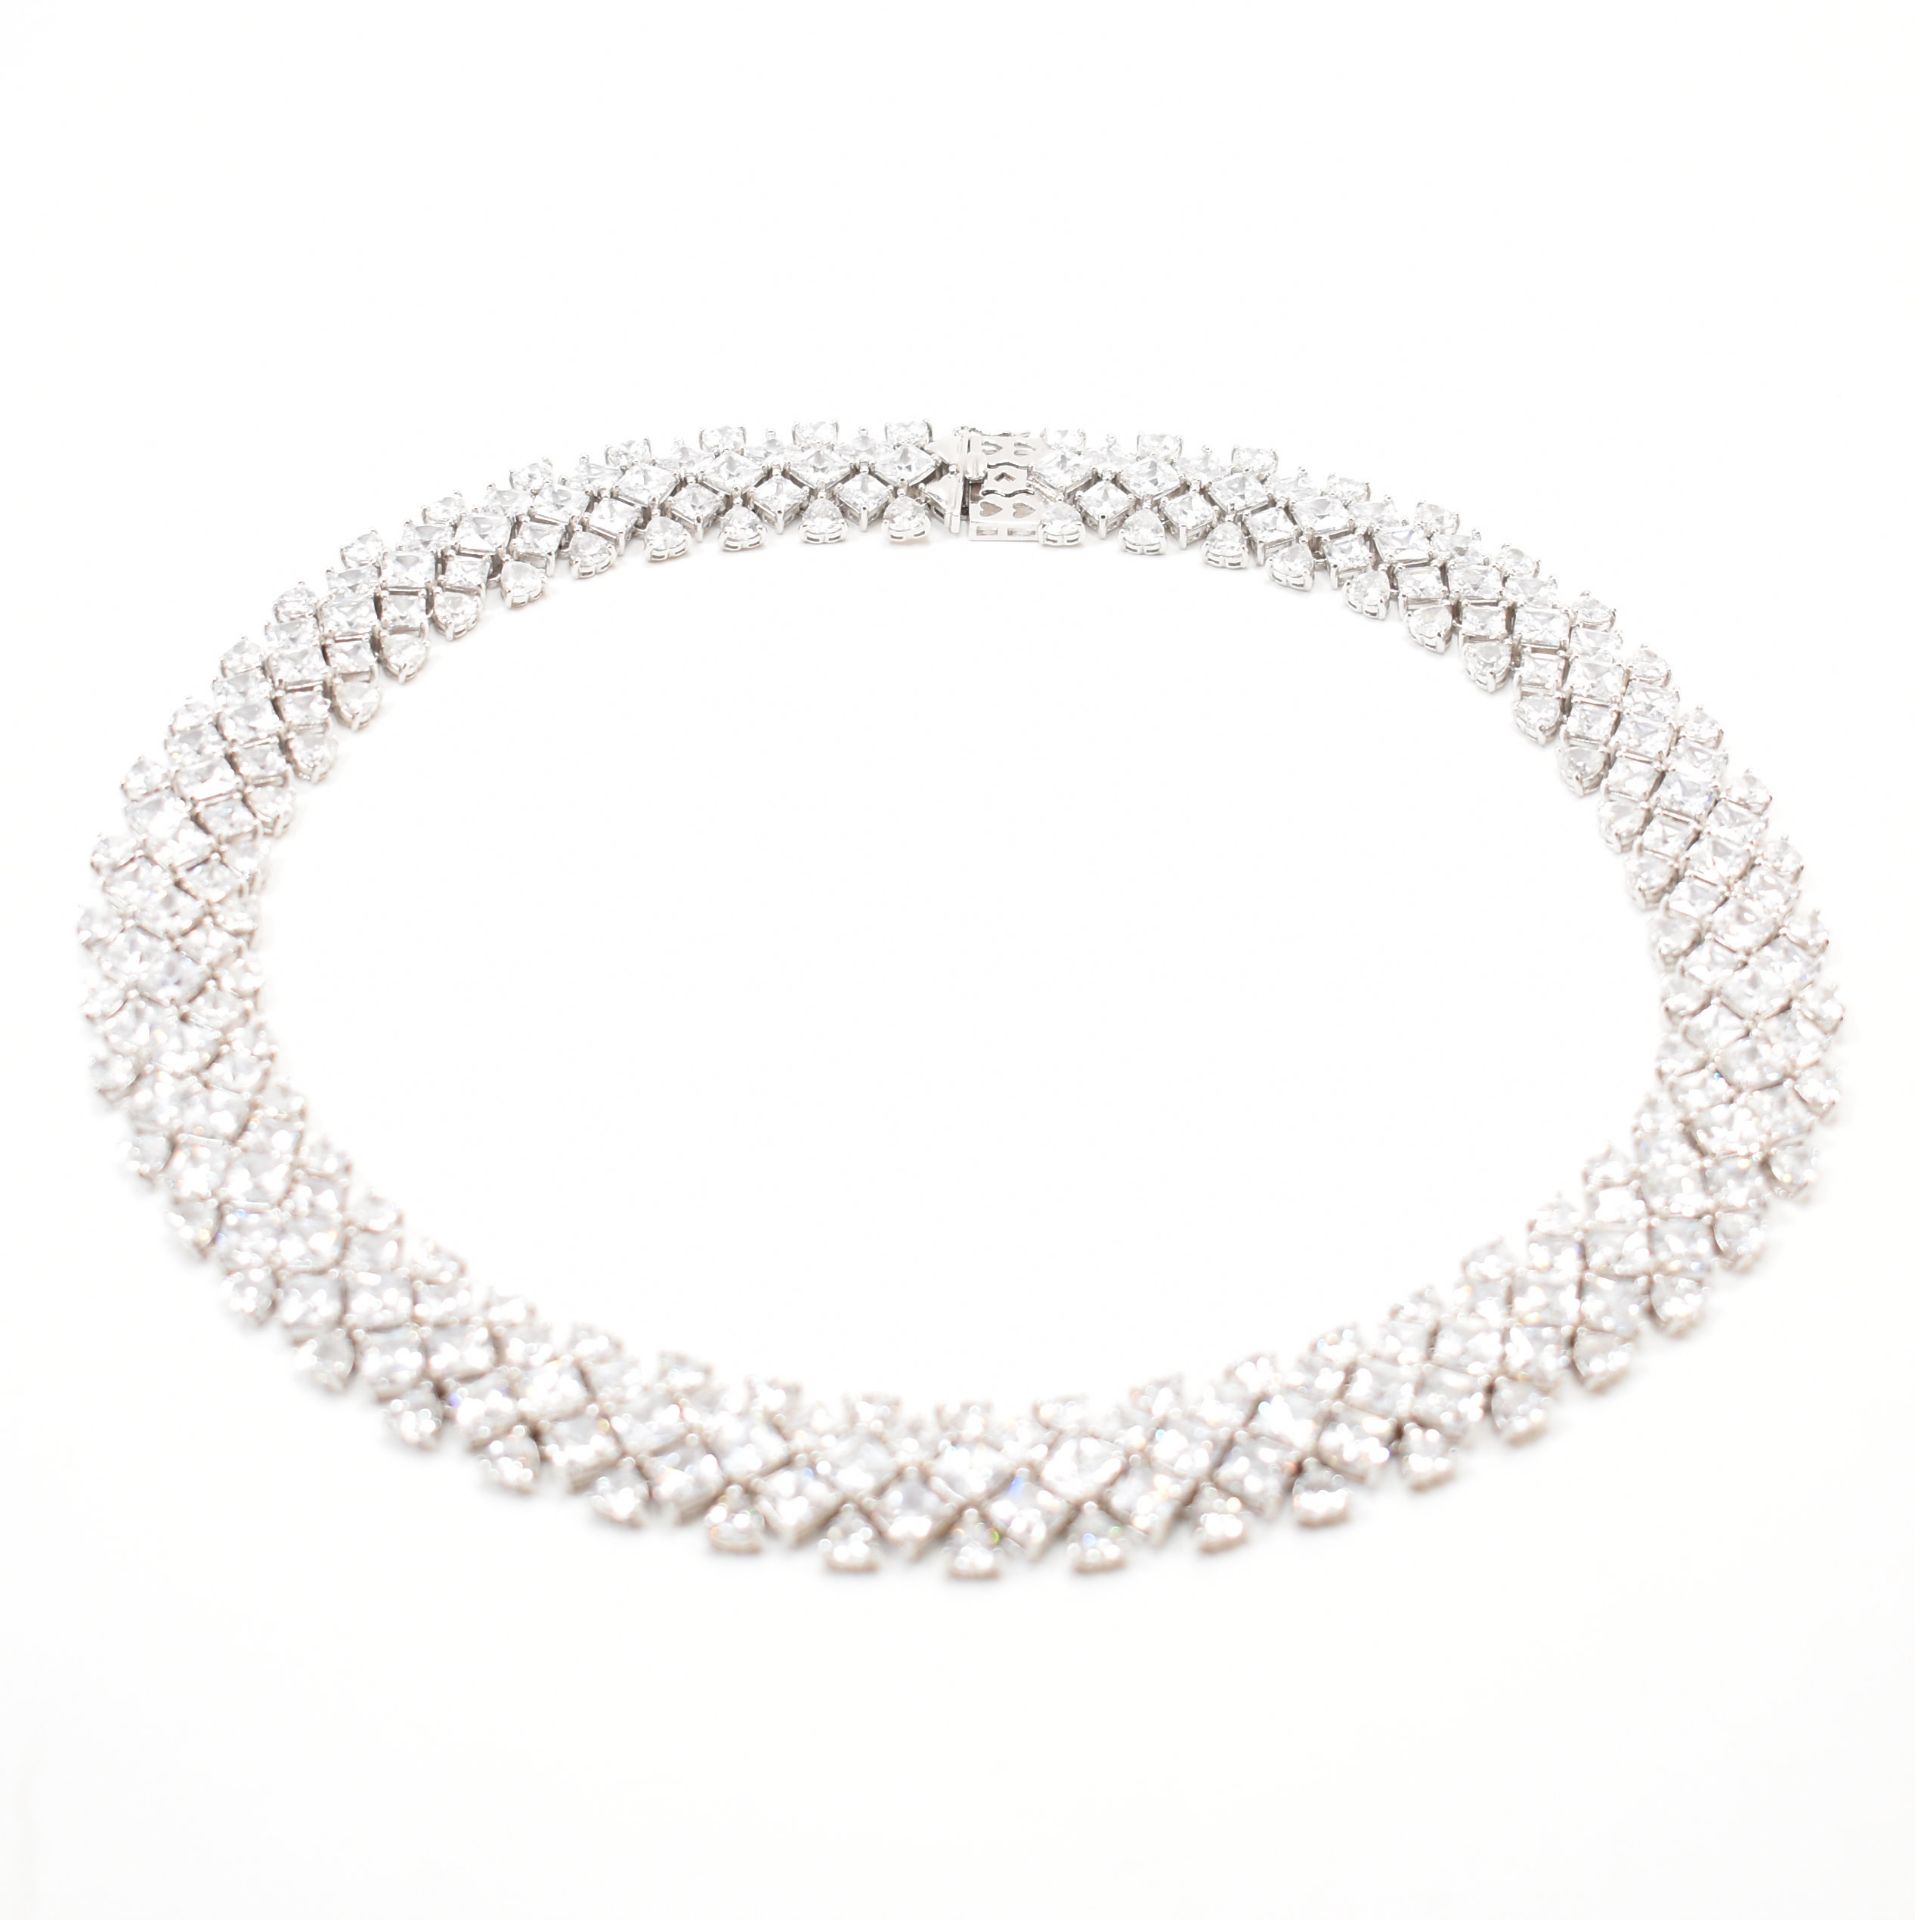 925 SILVER CUBIC ZIRCONIA STONE SET COLLAR NECKLACE - Image 3 of 5